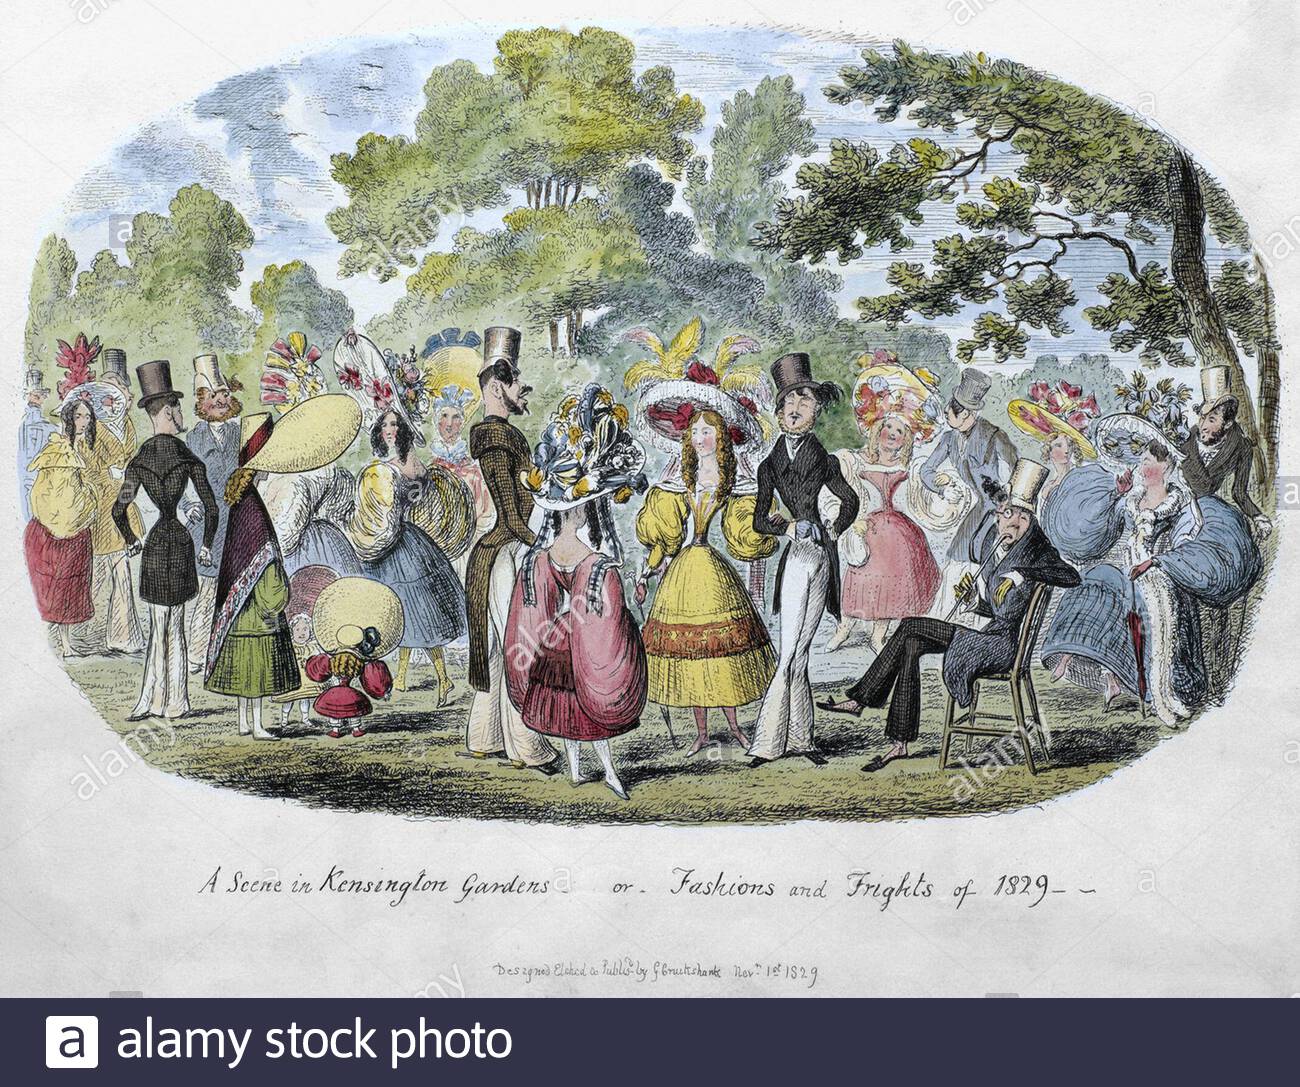 A scene in Kensington Gardens, or fashion and frights of 1829, vintage illustration from 1829 Stock Photo